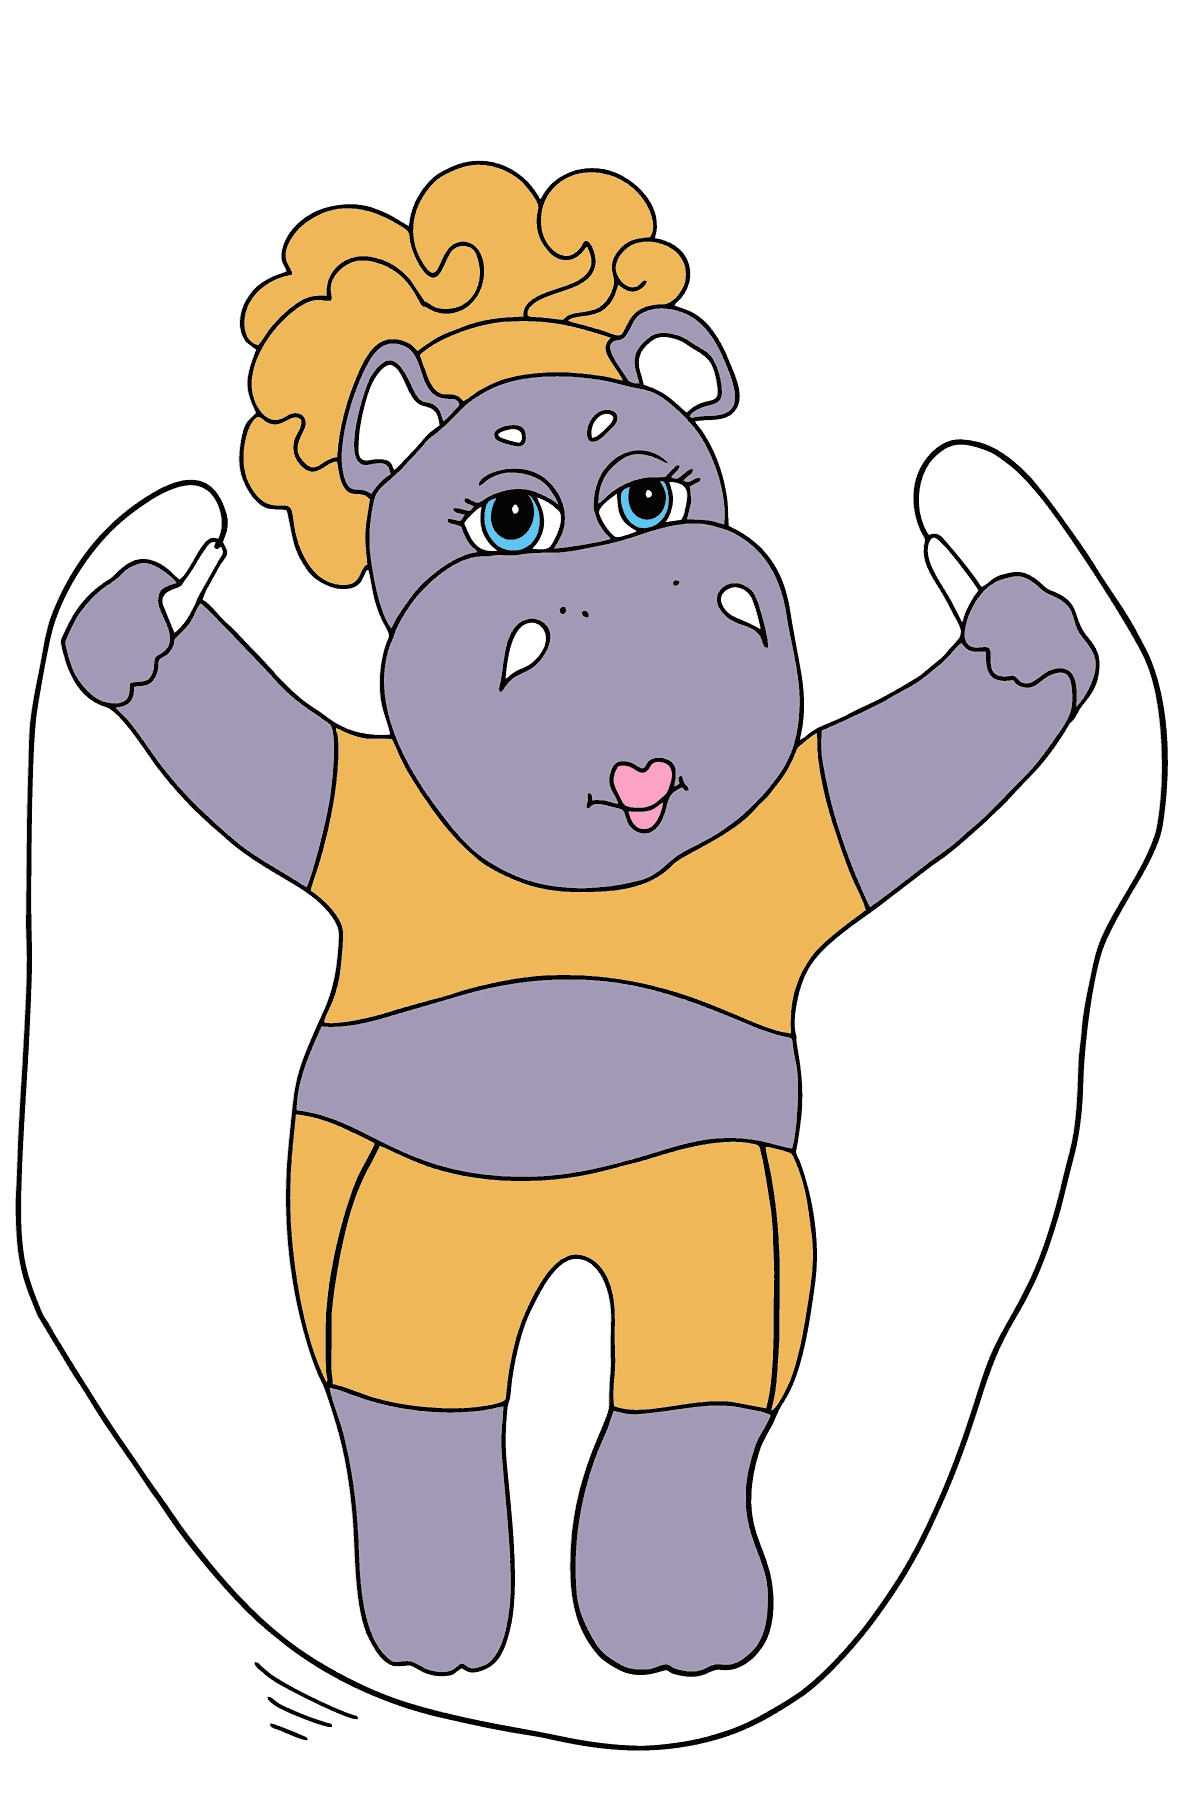 Cheerful Hippo coloring page - Coloring Pages for Kids